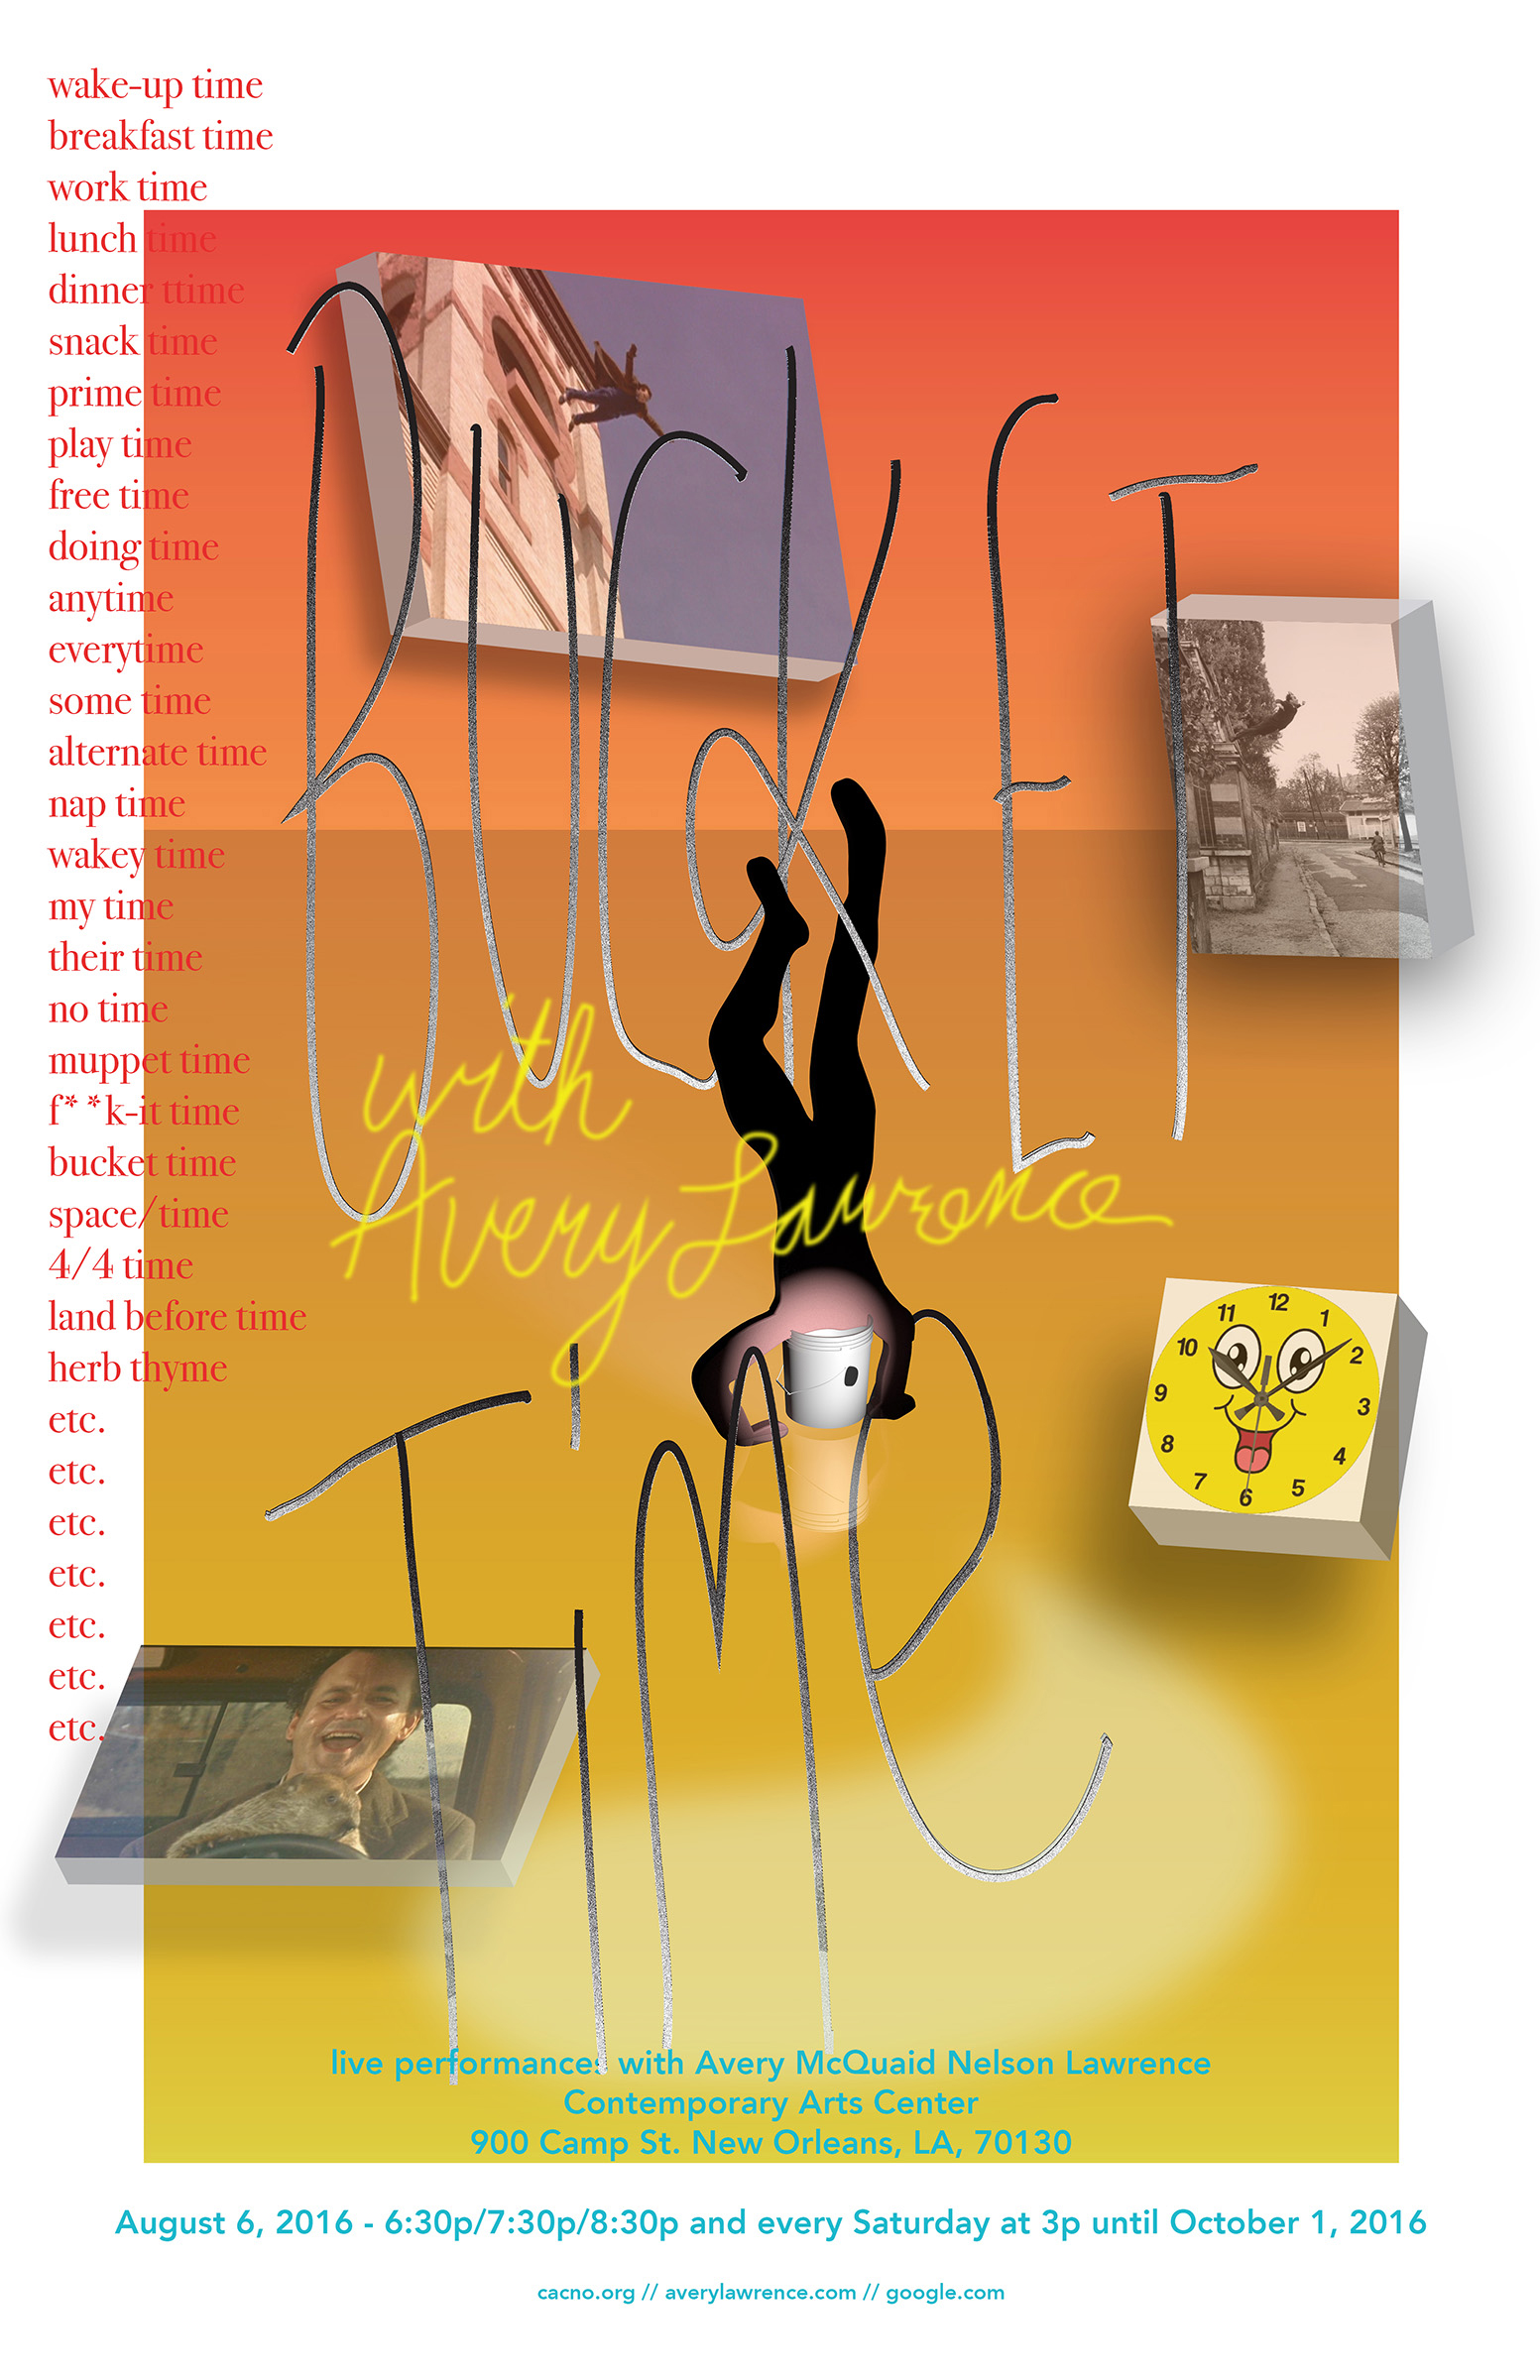 A poster with handwritten script that reads Bucket Time with Avery Lawrence. In the center is a silhouetted upside down human figure with its head in a white, construction bucket. Two photographs of people jumping and one photograph of the actor Bill Murray surround the central figure. There is also a clipart-style image of a yellow clock with eyes sticking out its tongue.